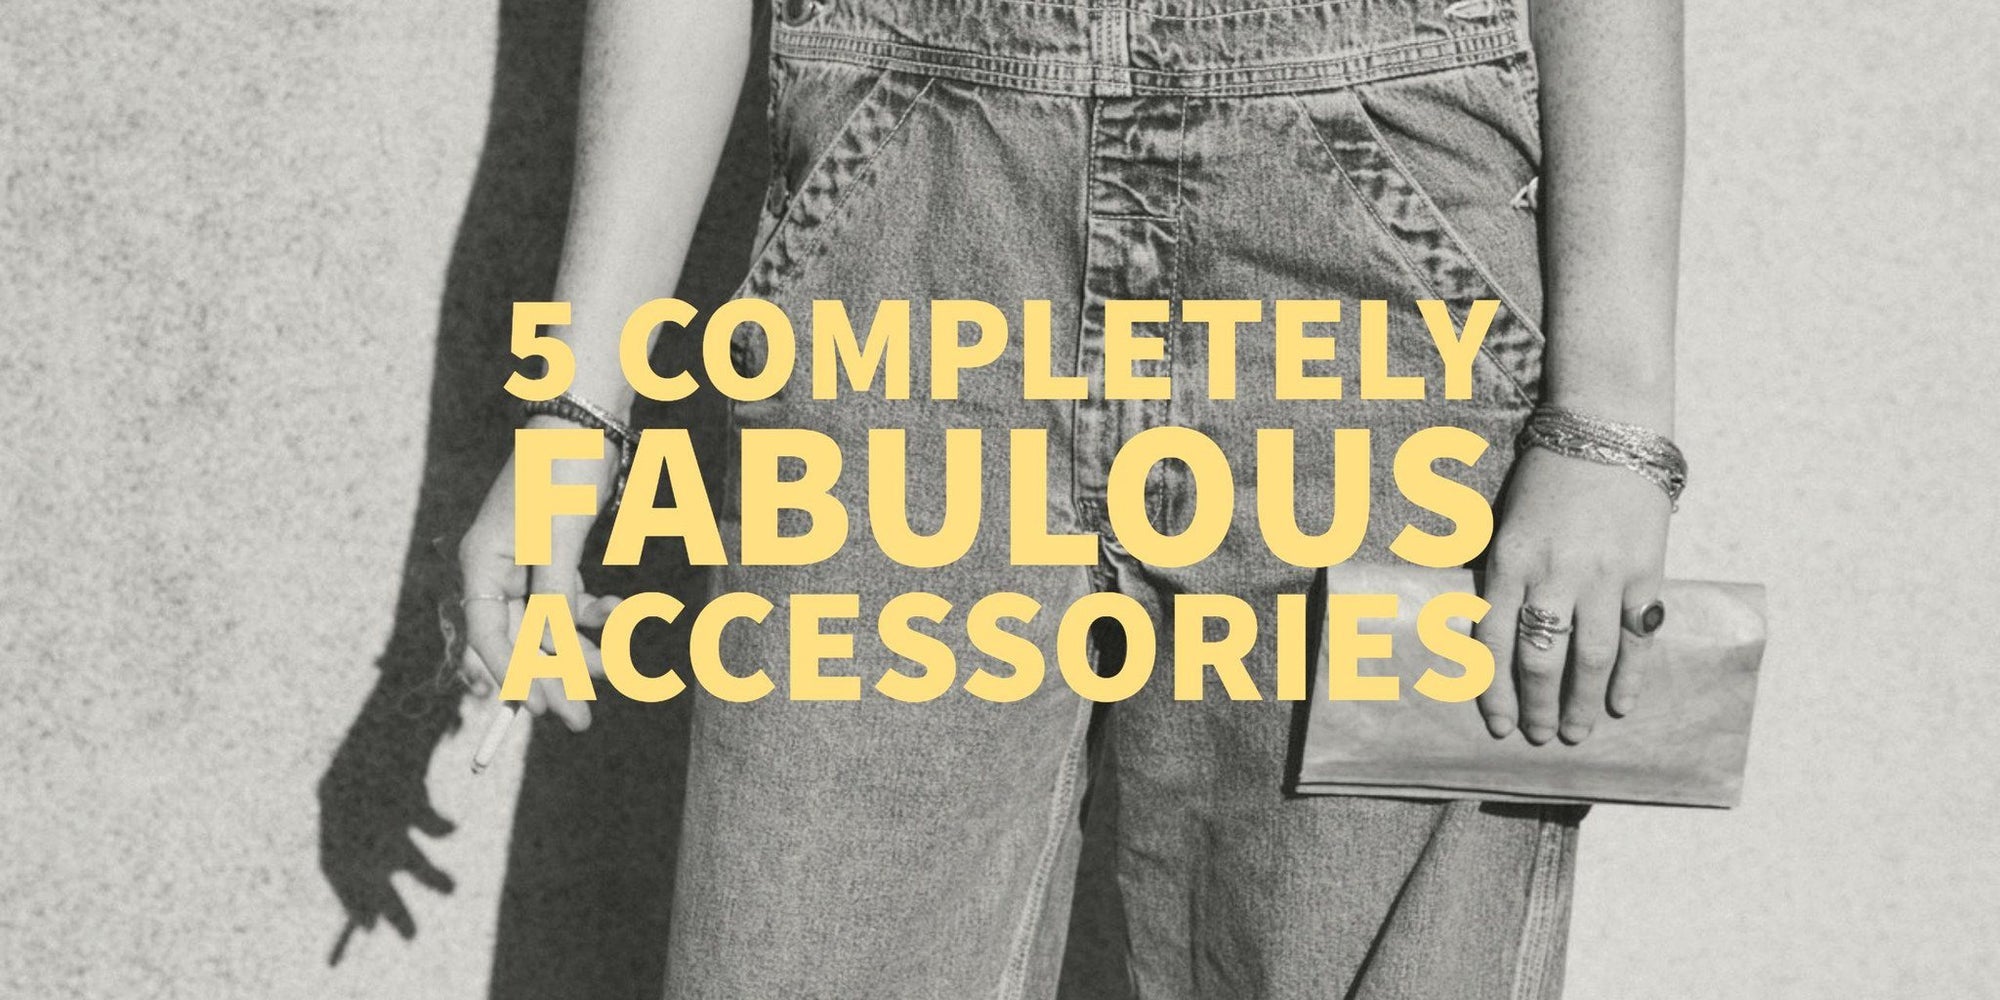 Awesome Accessories that will Impress Anyone!